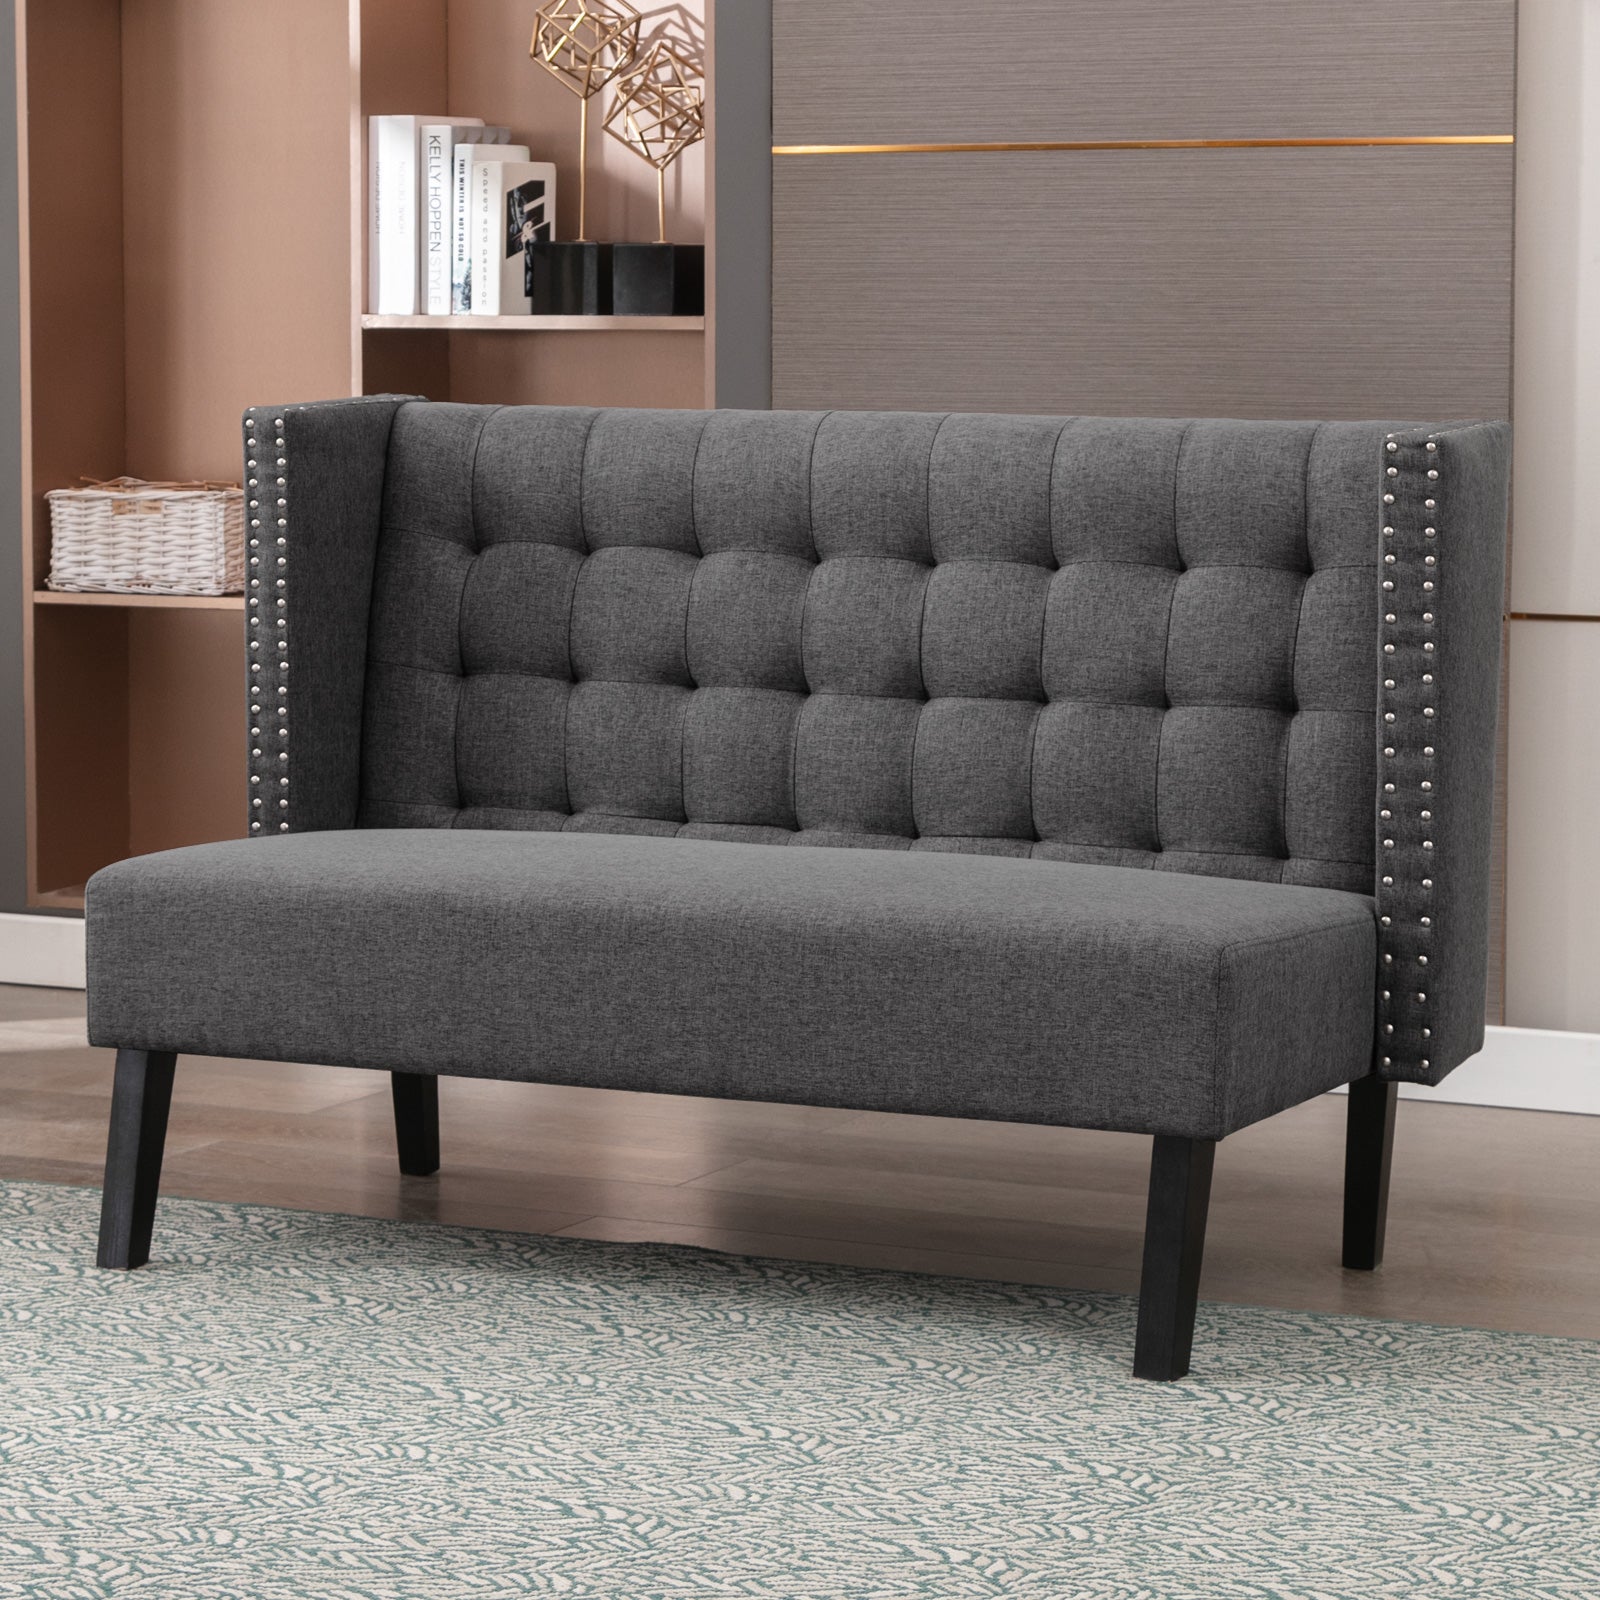 Mjkone Modern Settee Sofa Couch |Loveseat Bench Sofa Upholstered Diamond Shaped Button Tufting High Back Comfortable for Living Room